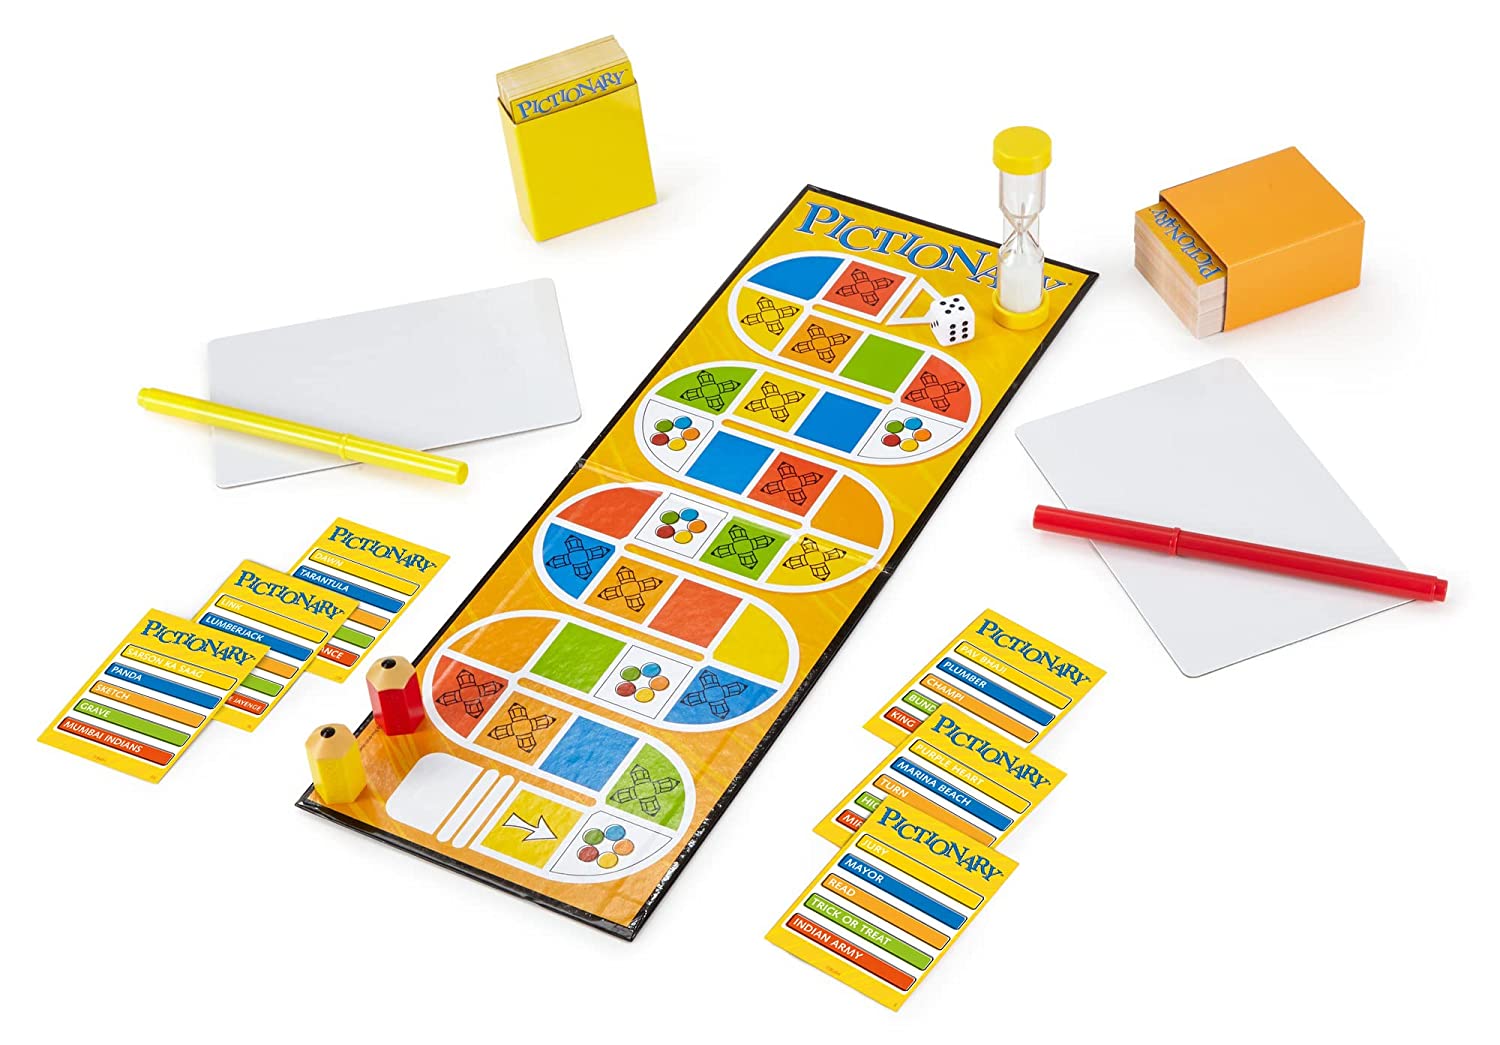 Mattel Games Pictionary India Special Board Game for Ages 8+